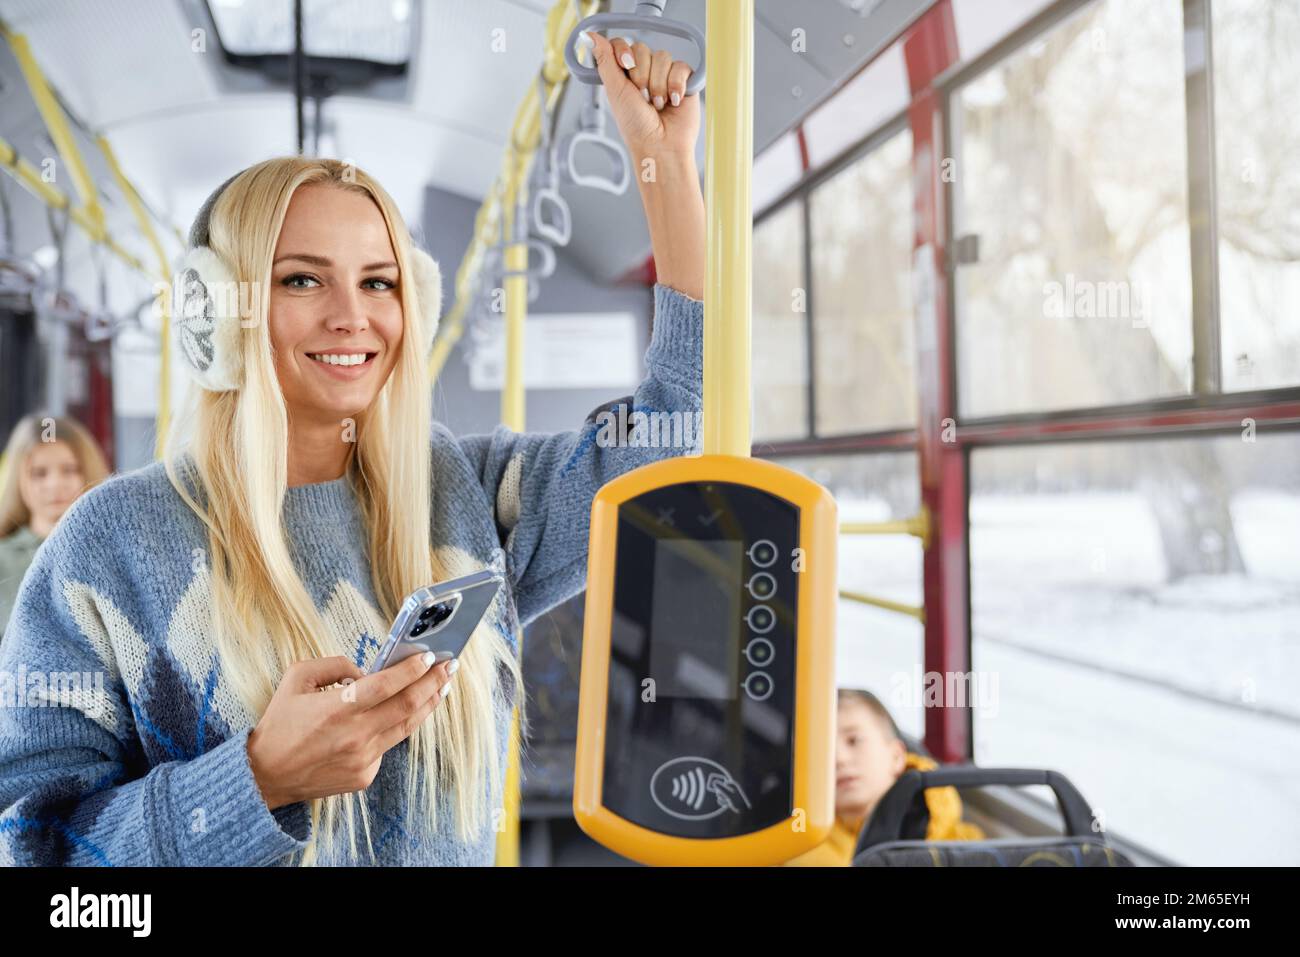 Portrait of fair long haired pretty female smiling nicely and looking directly in camera holding smarphone in one hand performing contactless payment Stock Photo